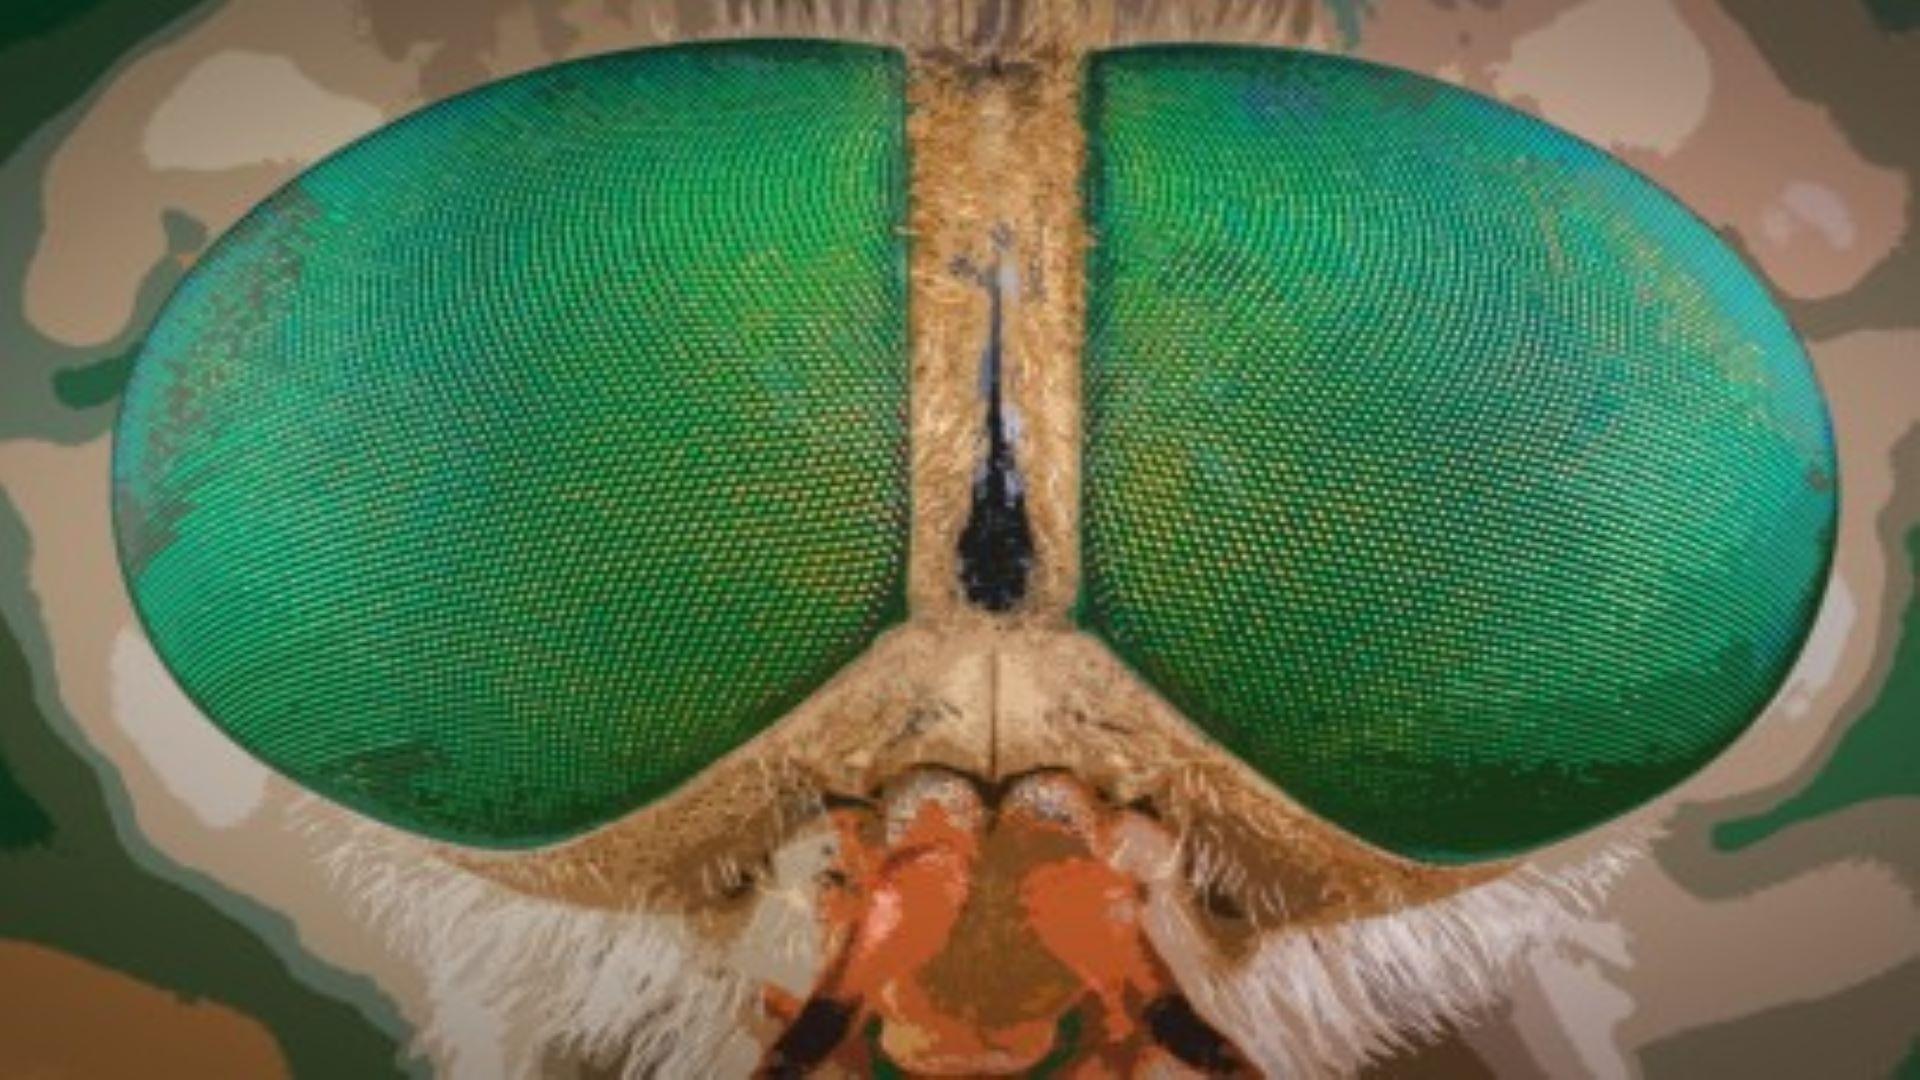 Housefly compound eye pattern, 2019 Photomicrography Competition